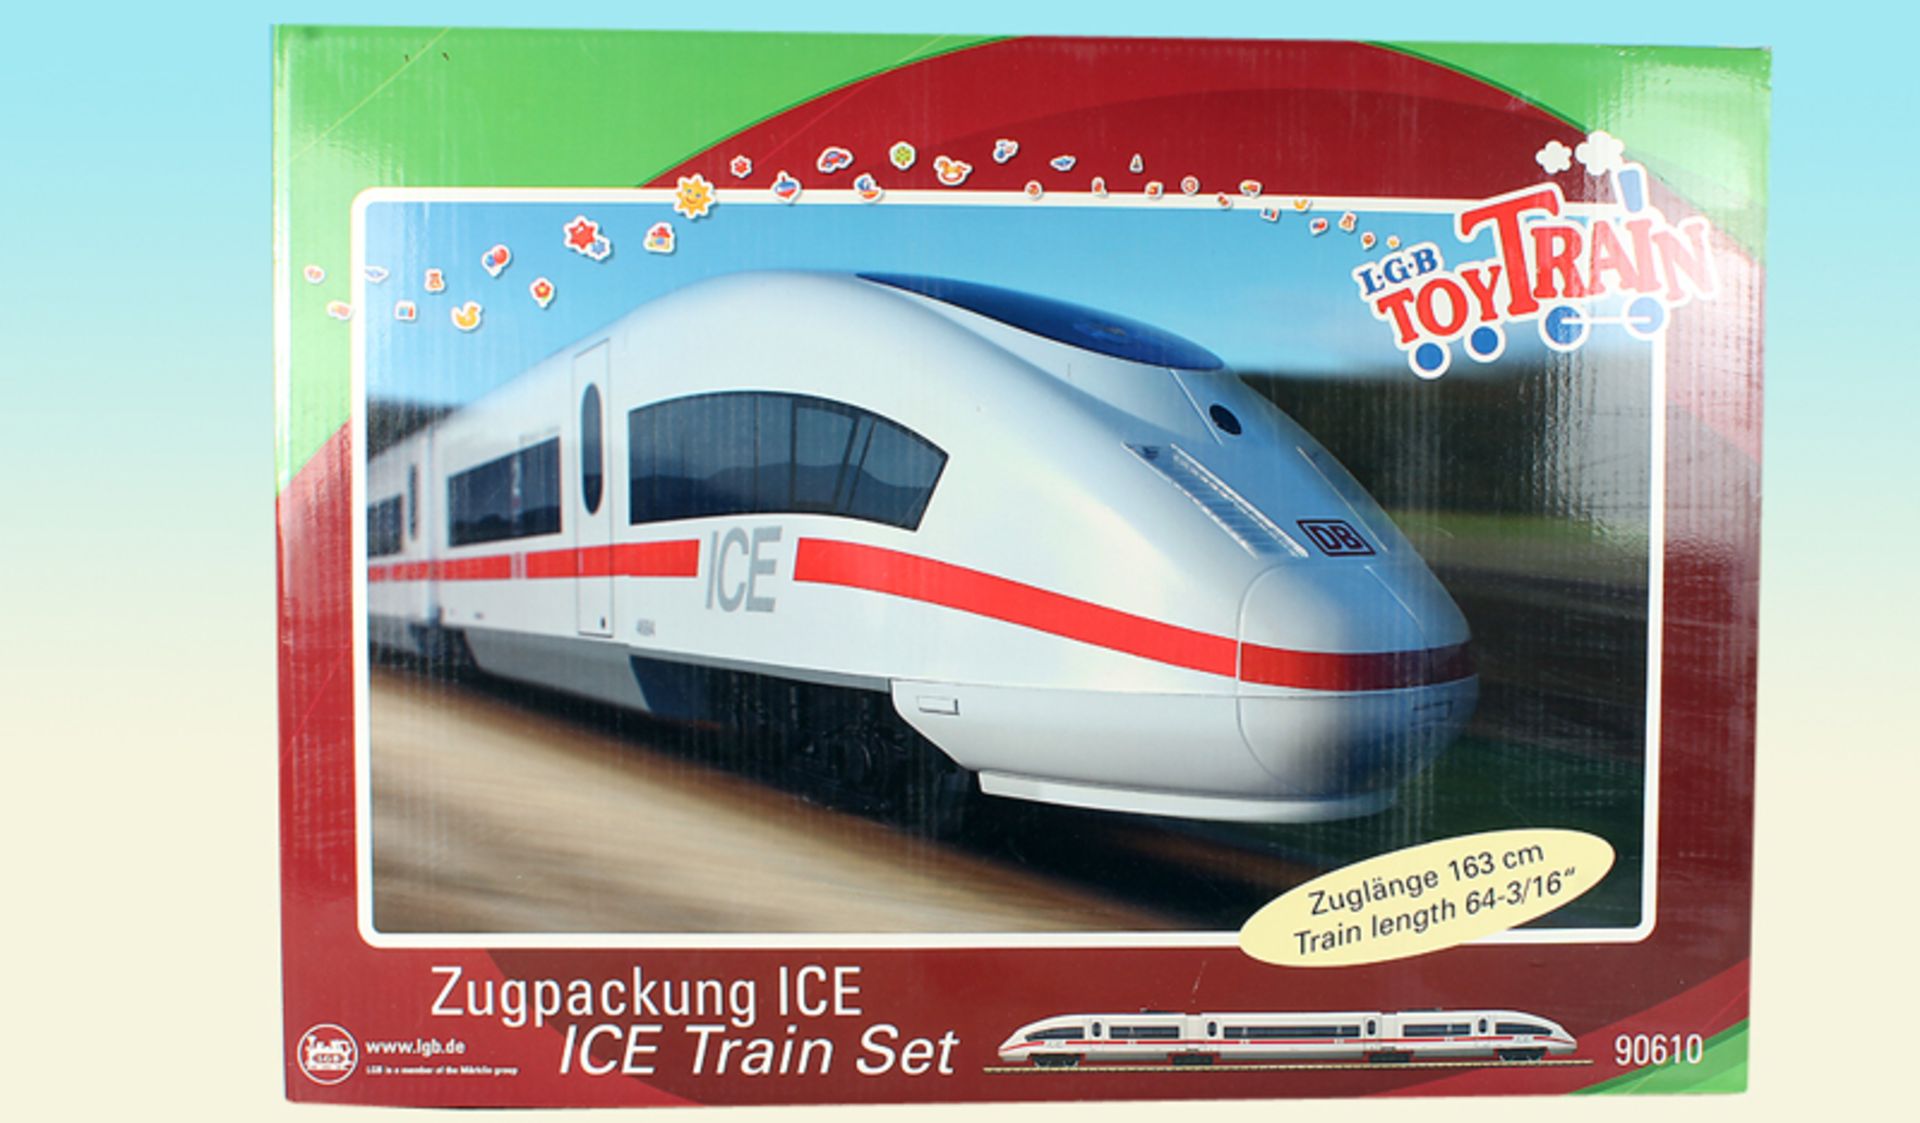 LGB Toy Train ICE Zugpackung - Spur 1